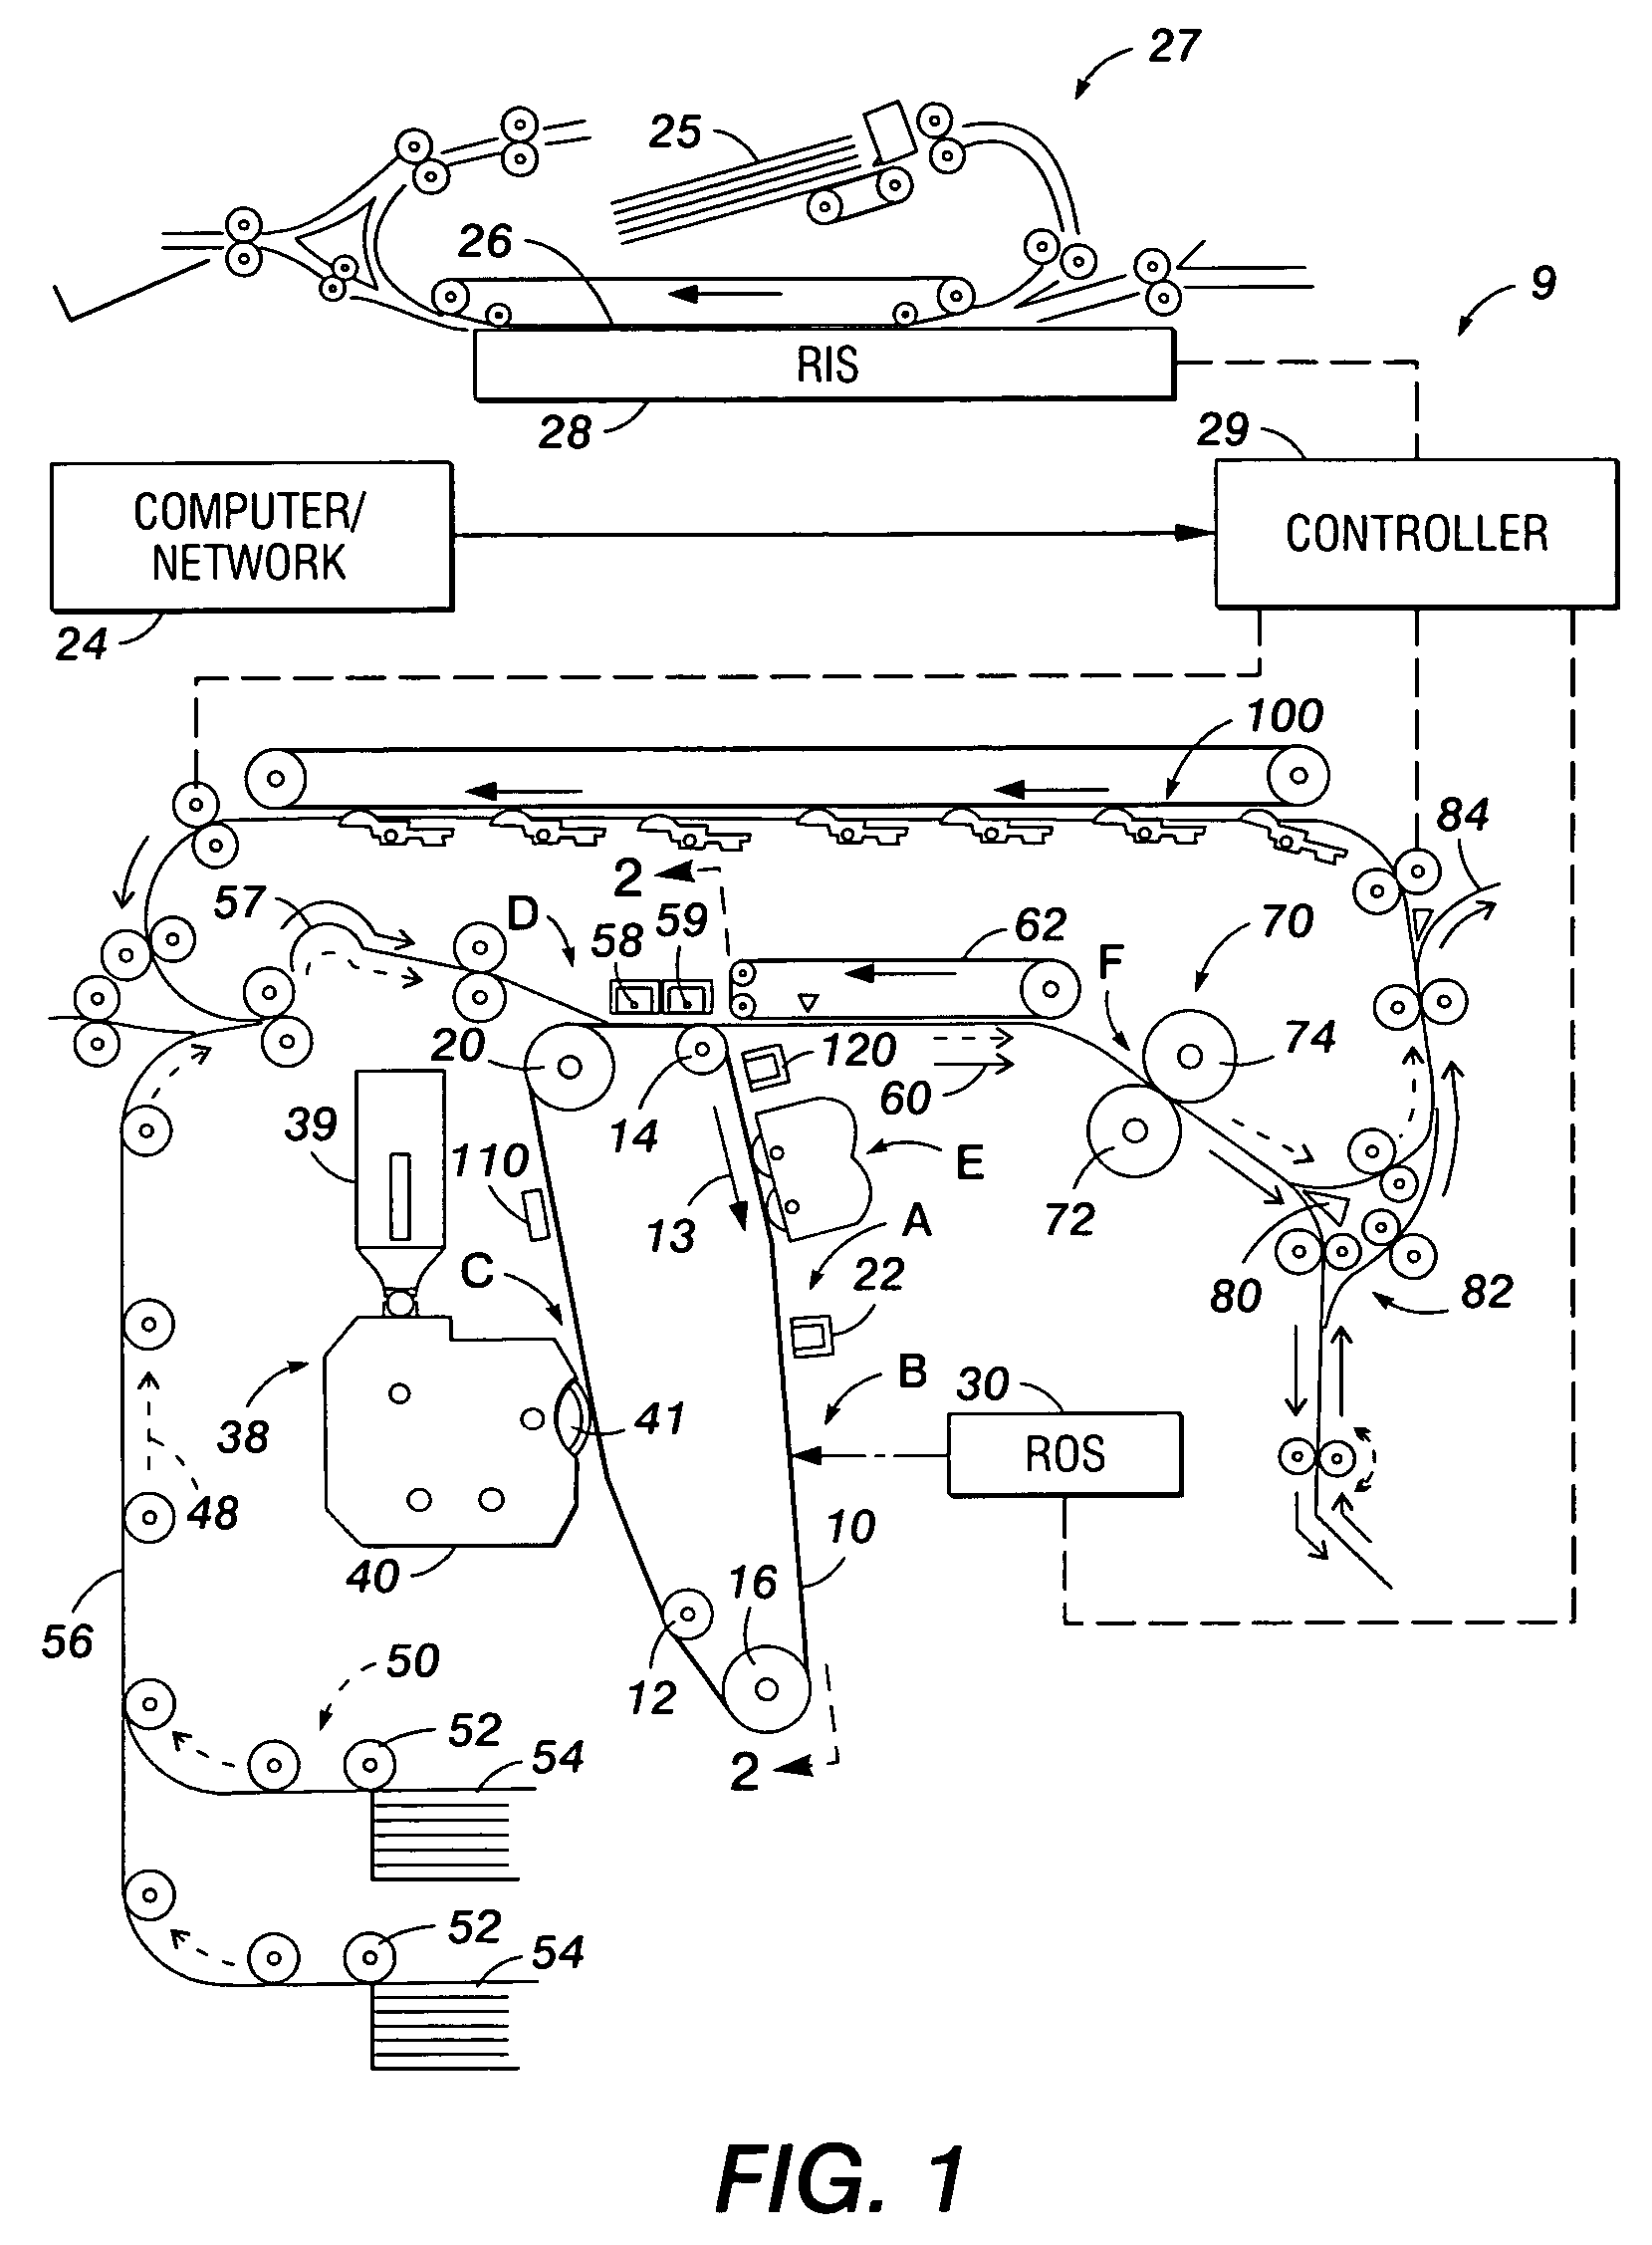 Method and apparatus for sensing and controlling residual mass on customer images